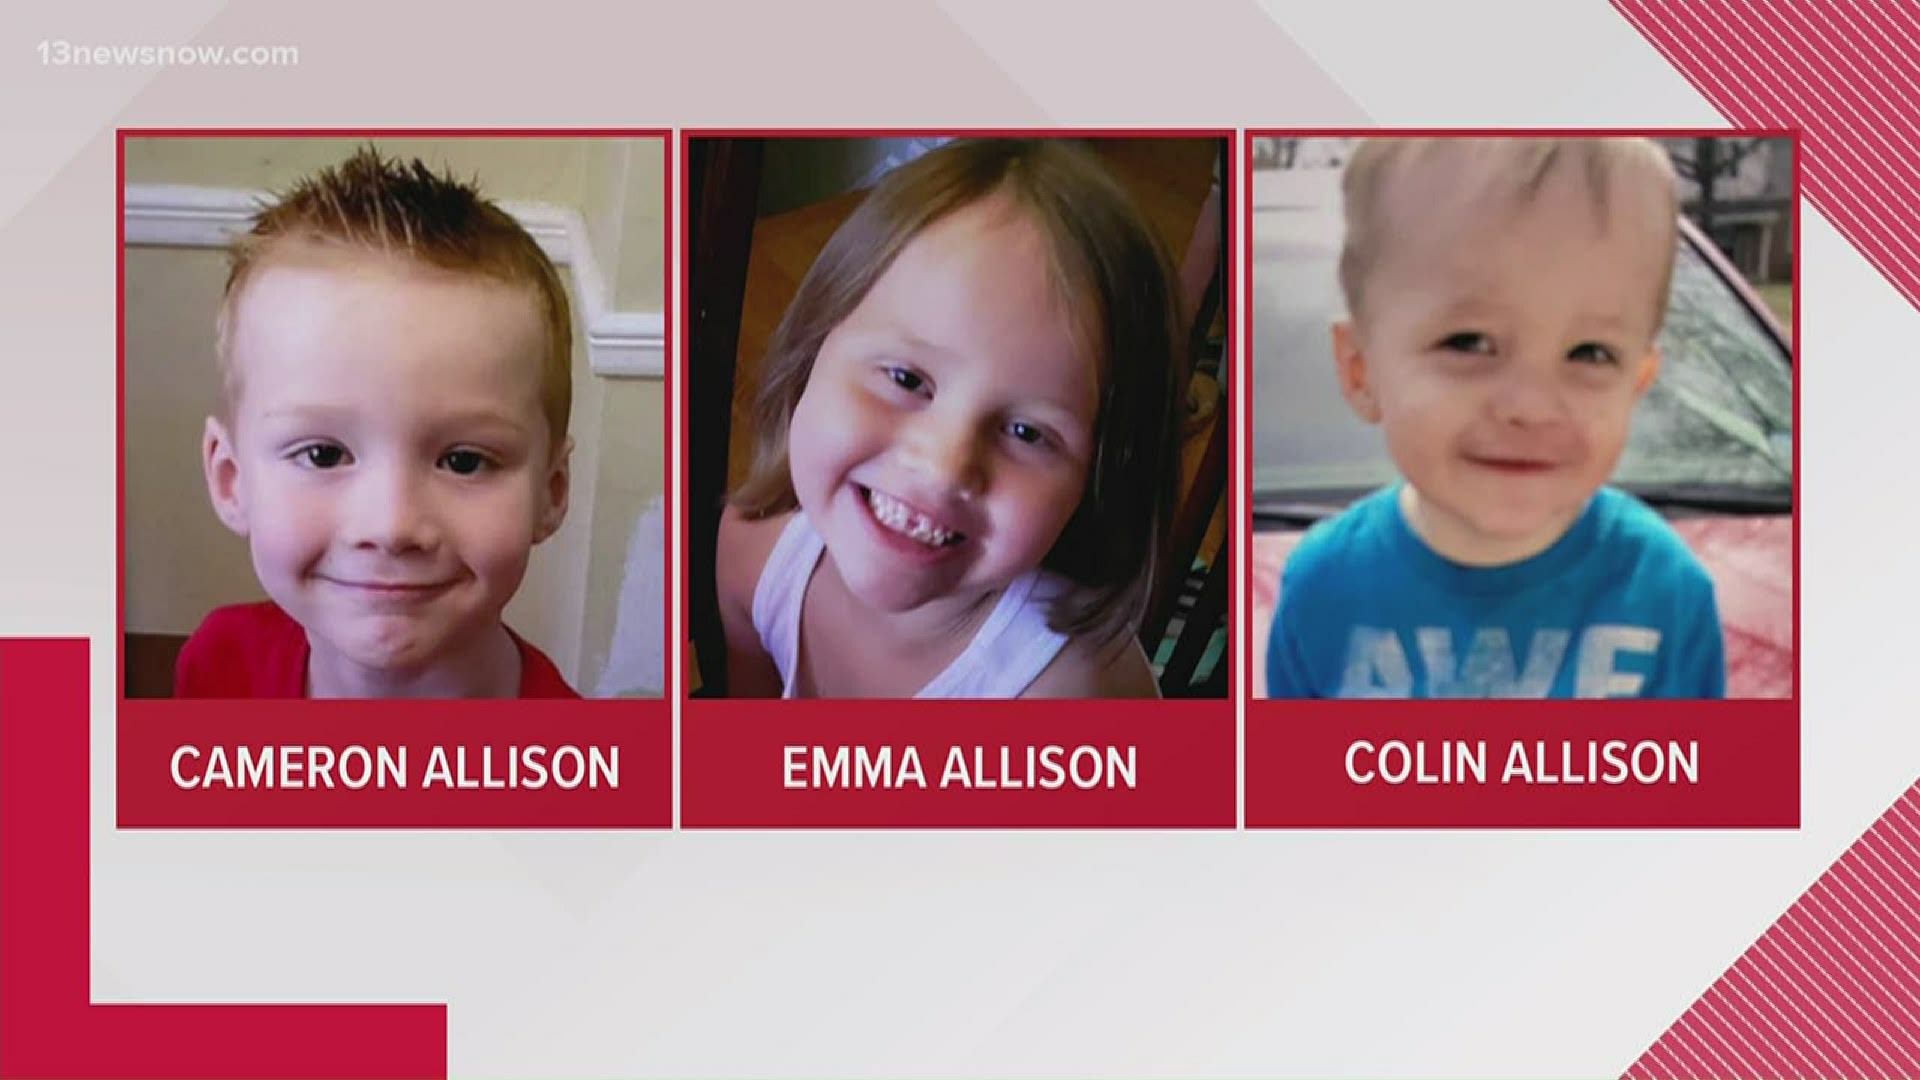 The kids may have been abducted by John Allison. He is driving a 1999 Maroon Chevy Suburban with tags VVU-3796 or 2006 Maroon Cadillac with tags VMV-8238.